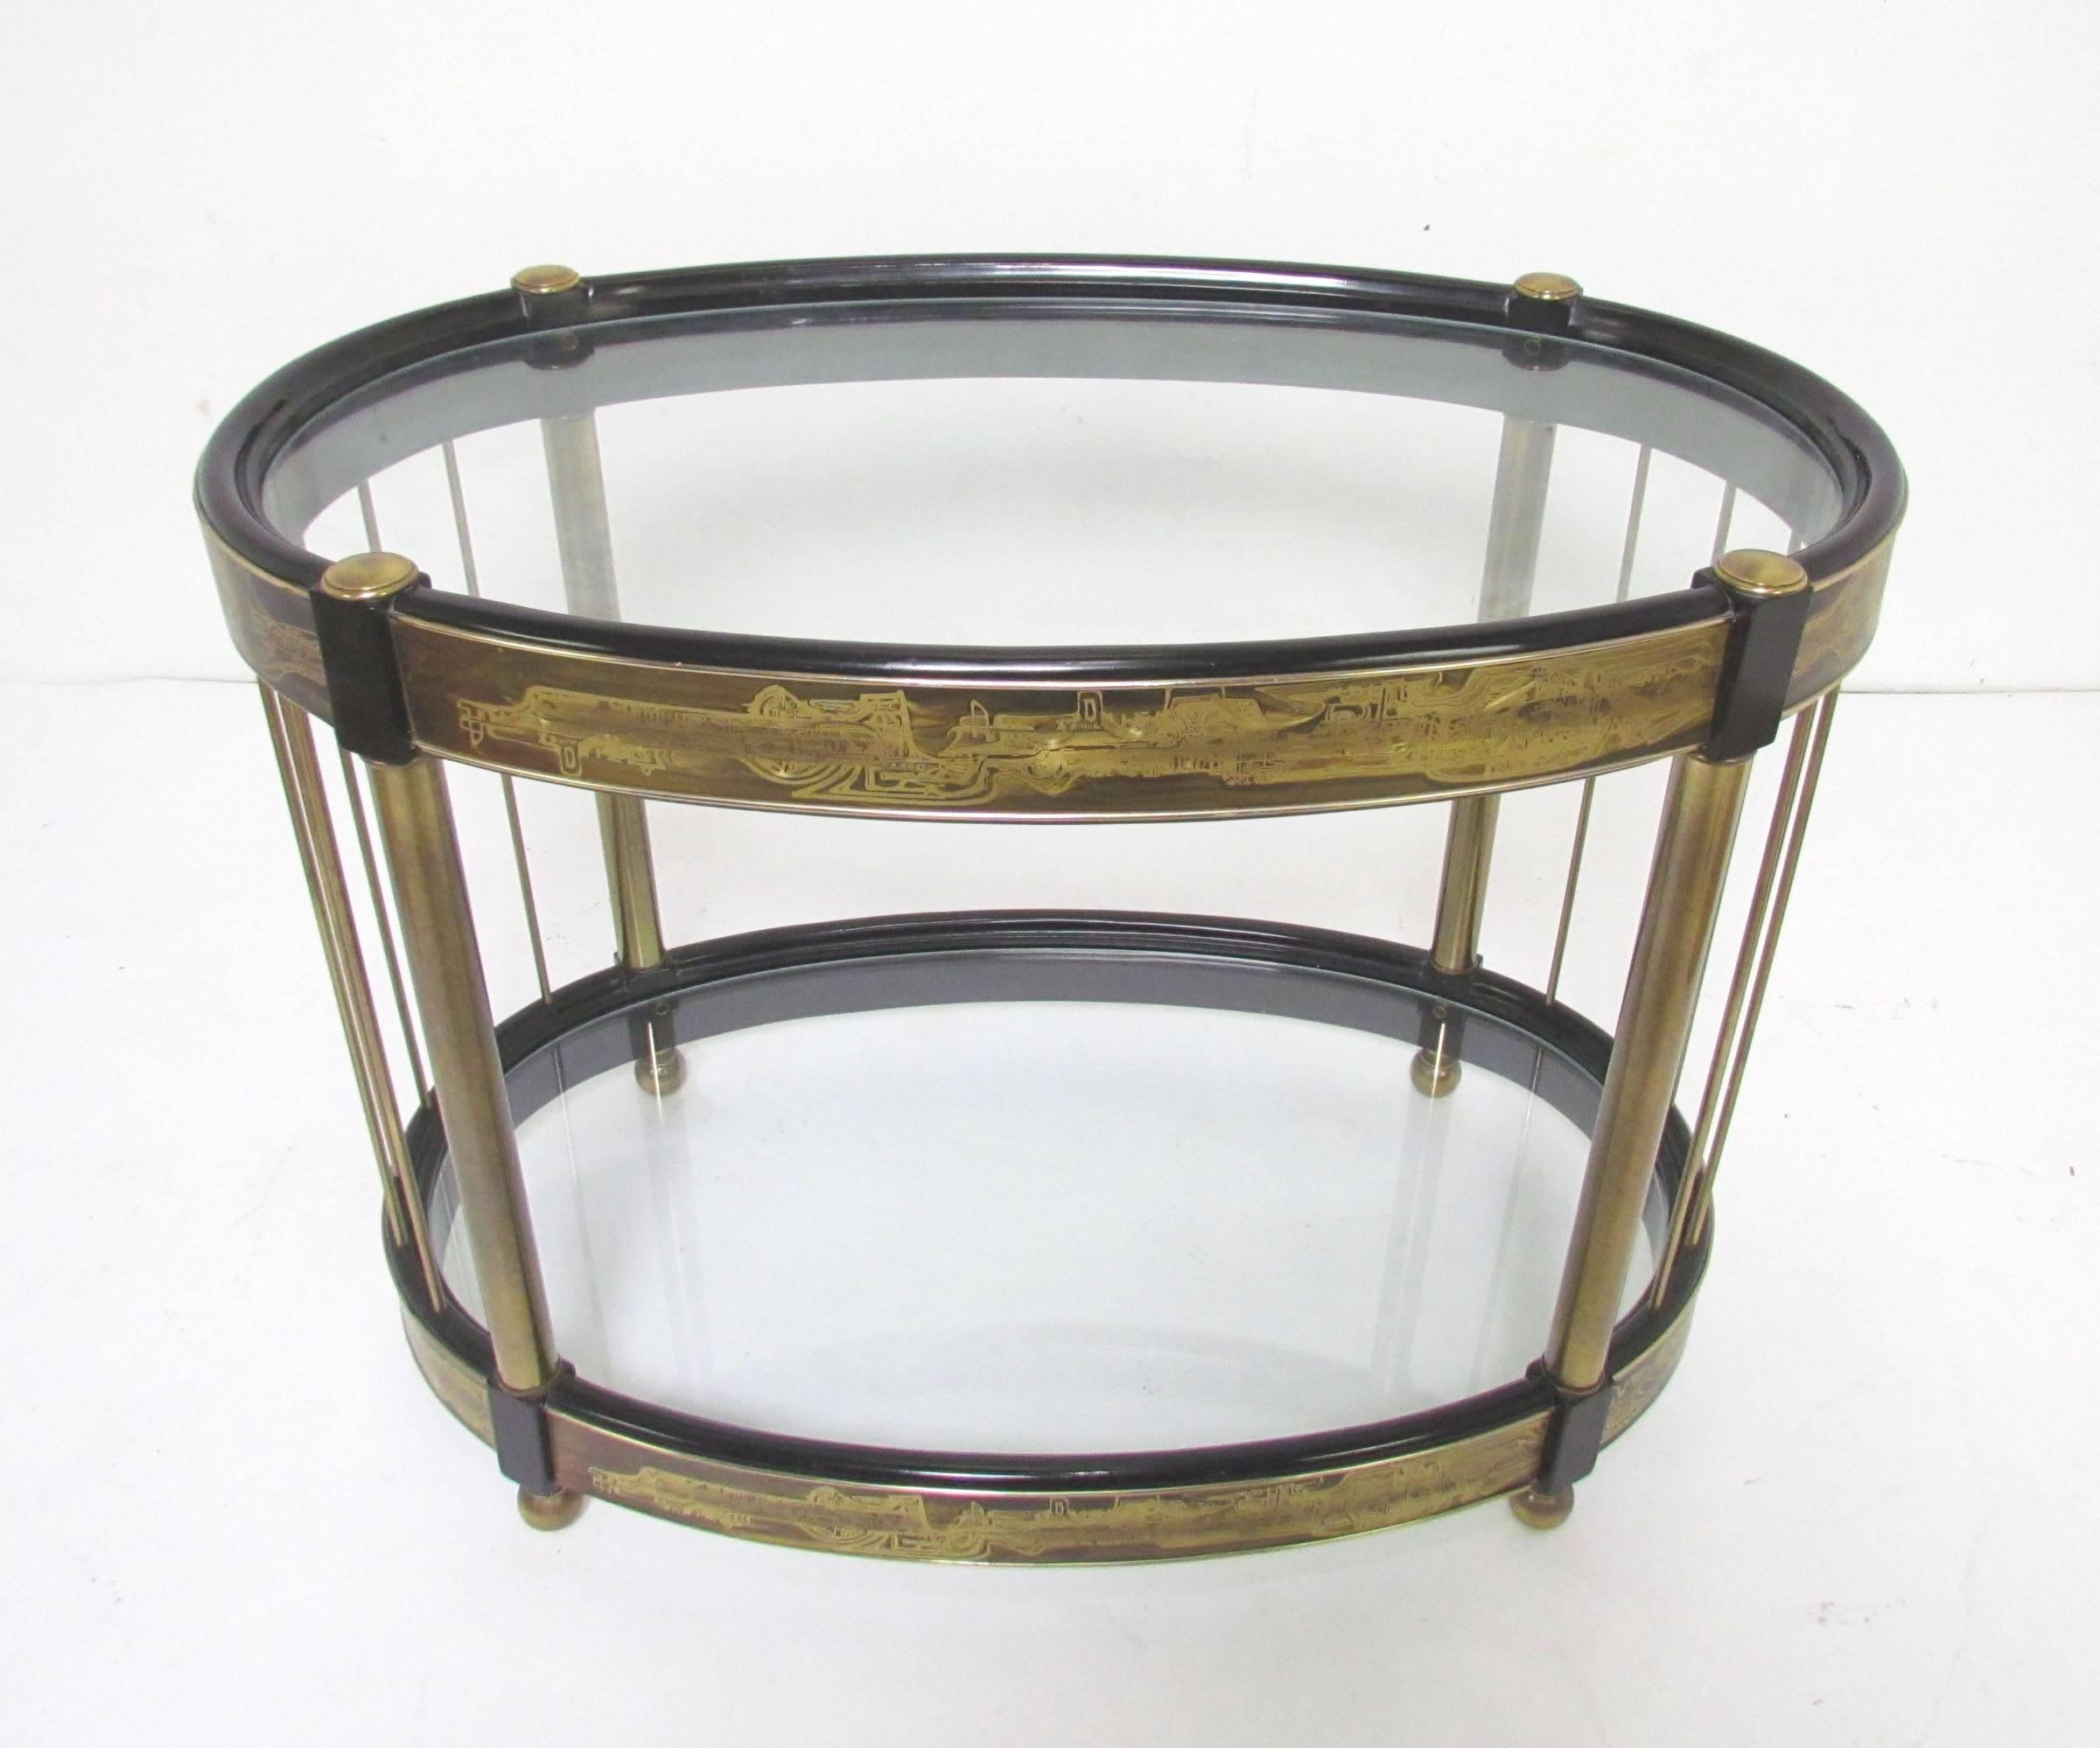 Two-tiered side table designed by Bernhard Rohne for Mastercraft, with abstract acid etched decoration on brass panels, affixed to a lacquered wood frame. Would make an excellent (stationary) bar or drinks table.